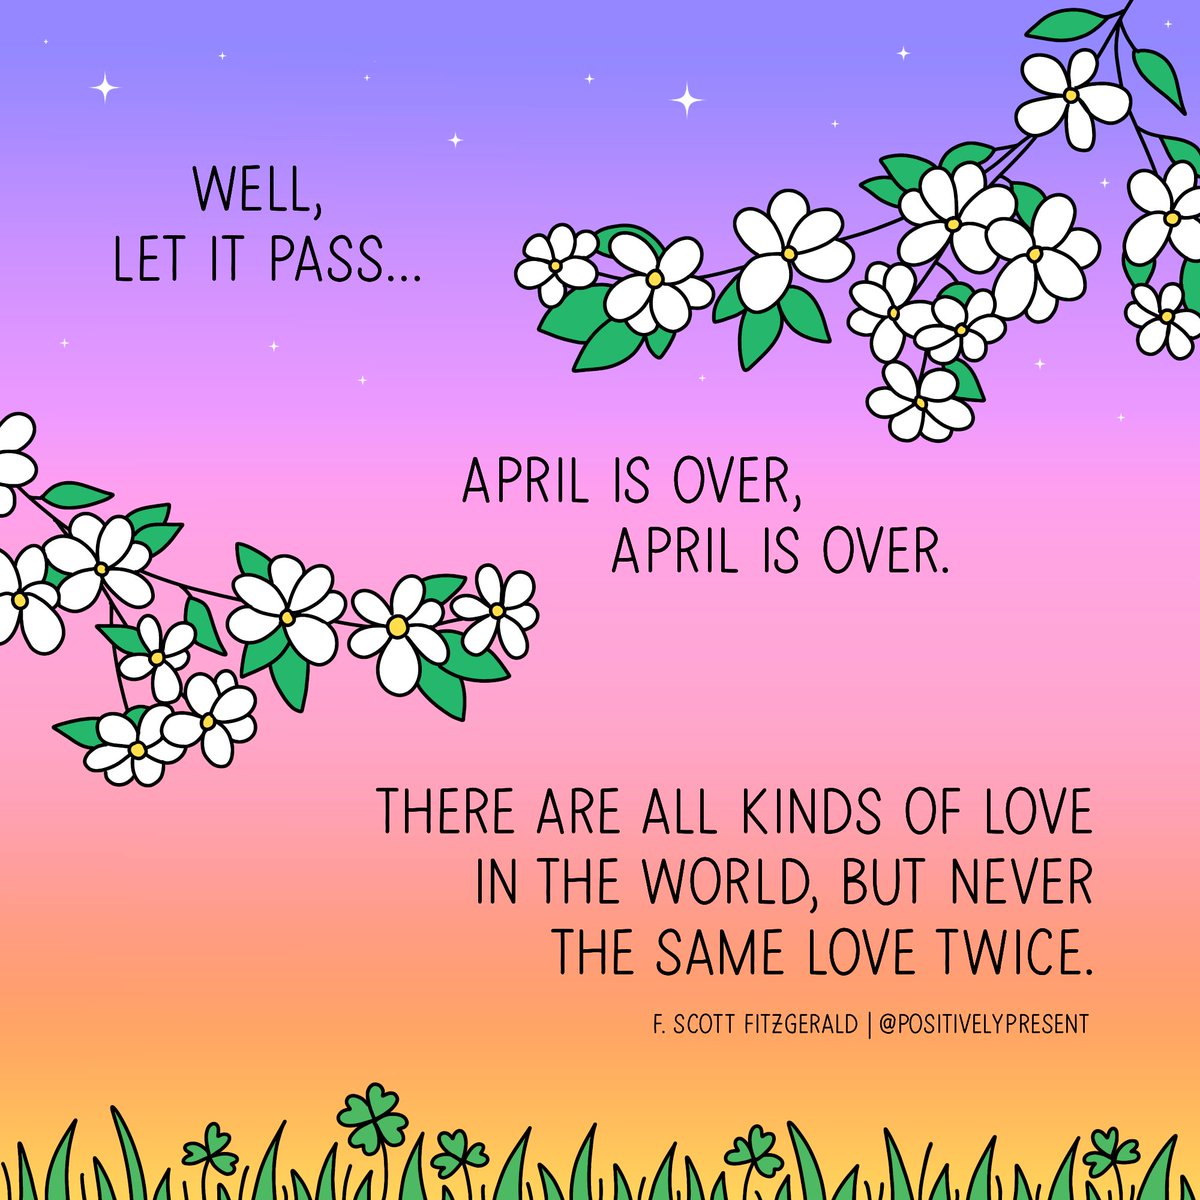 Let go of April. May is on the way!